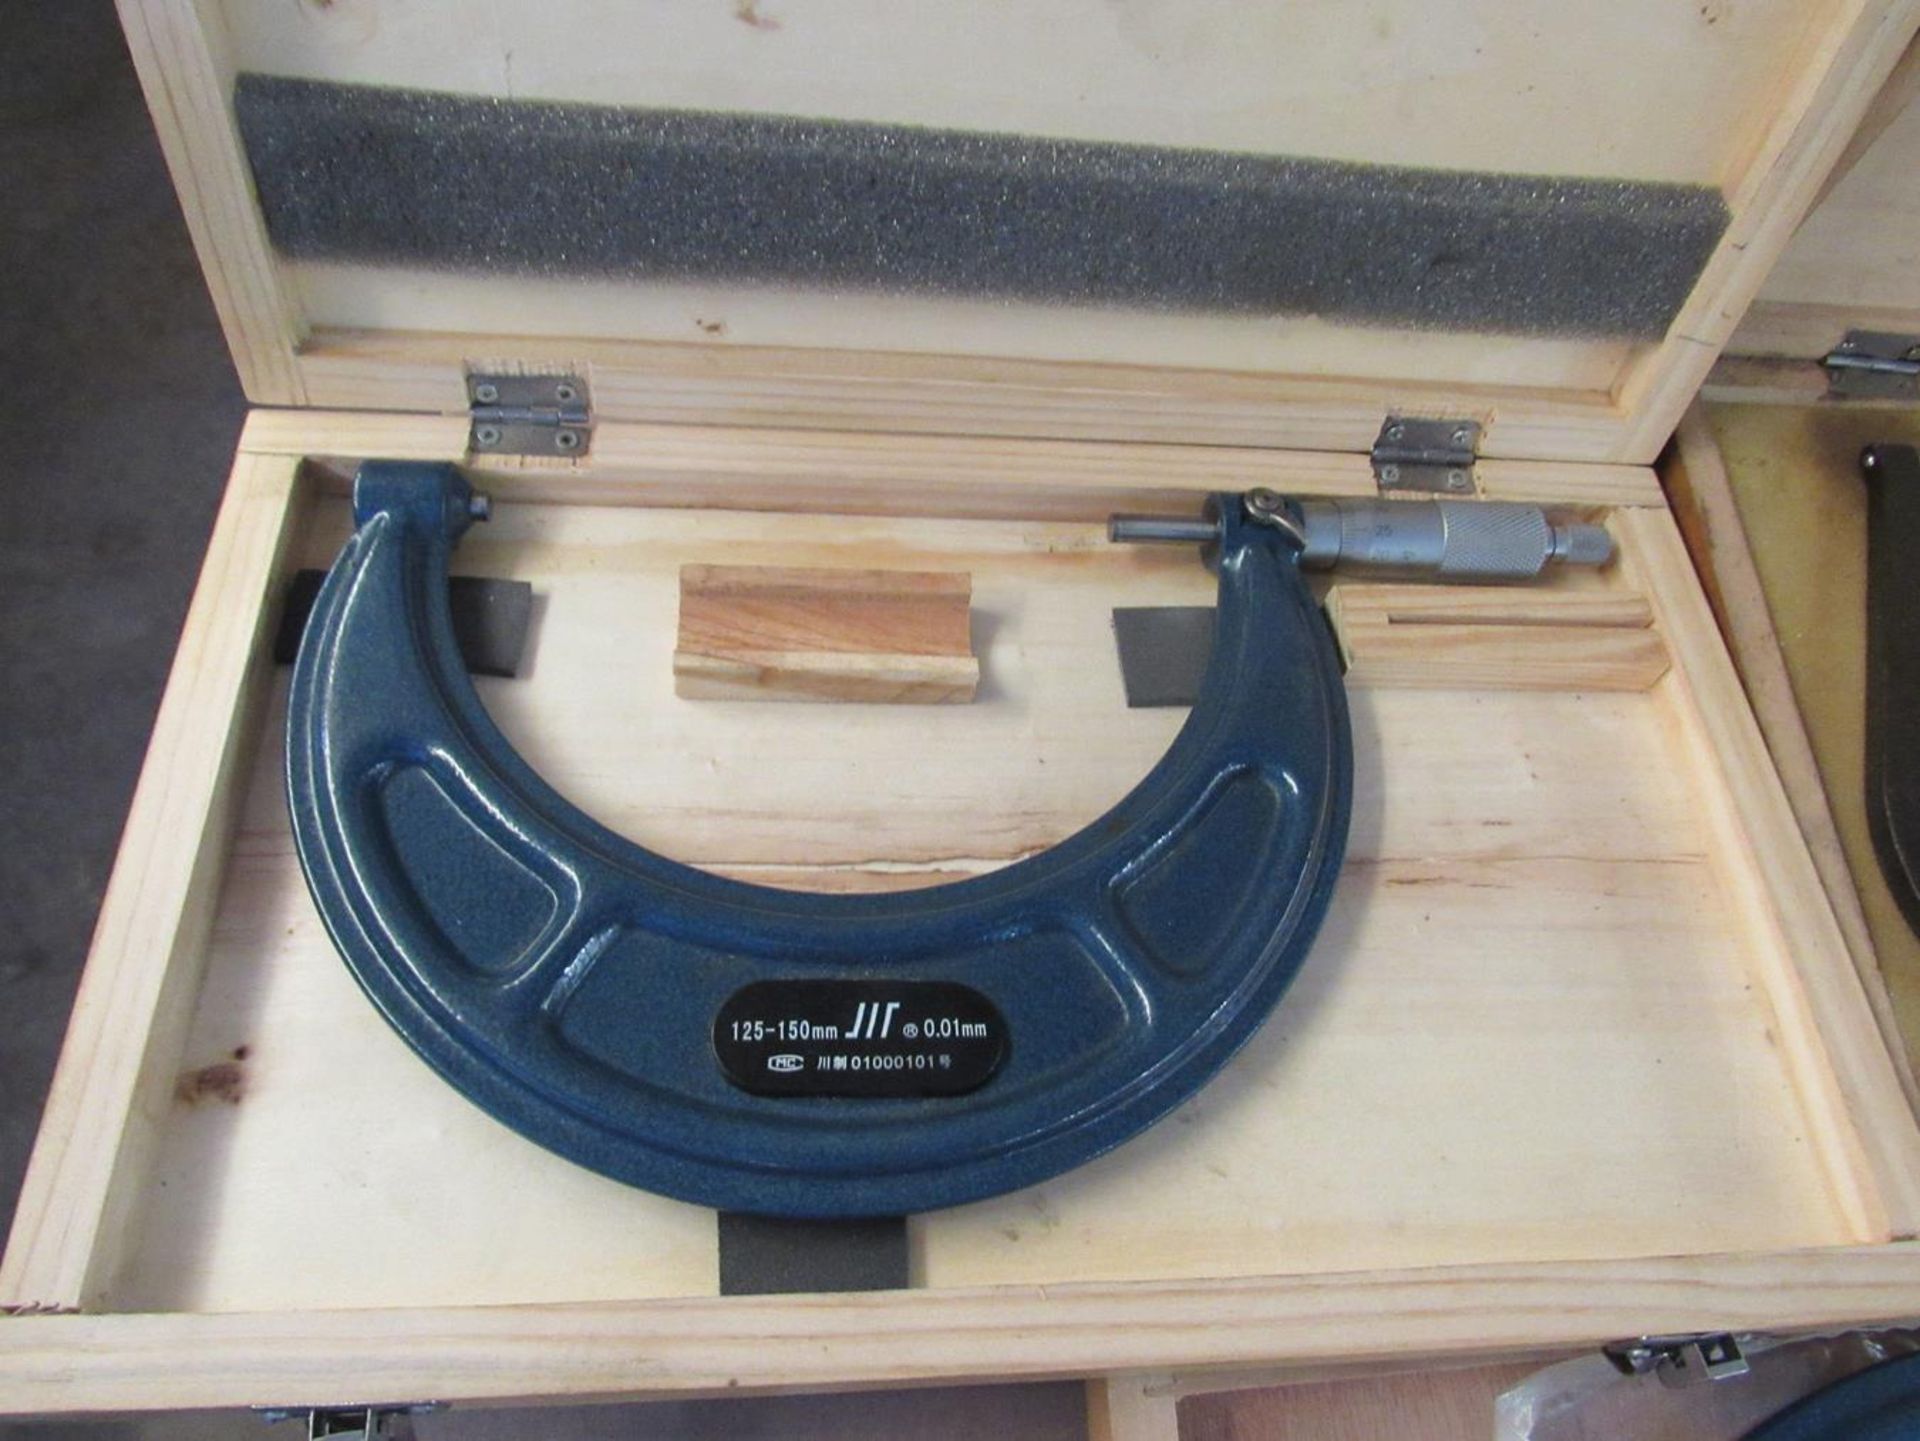 Lot of 5 O.D. Micrometers - Image 2 of 6